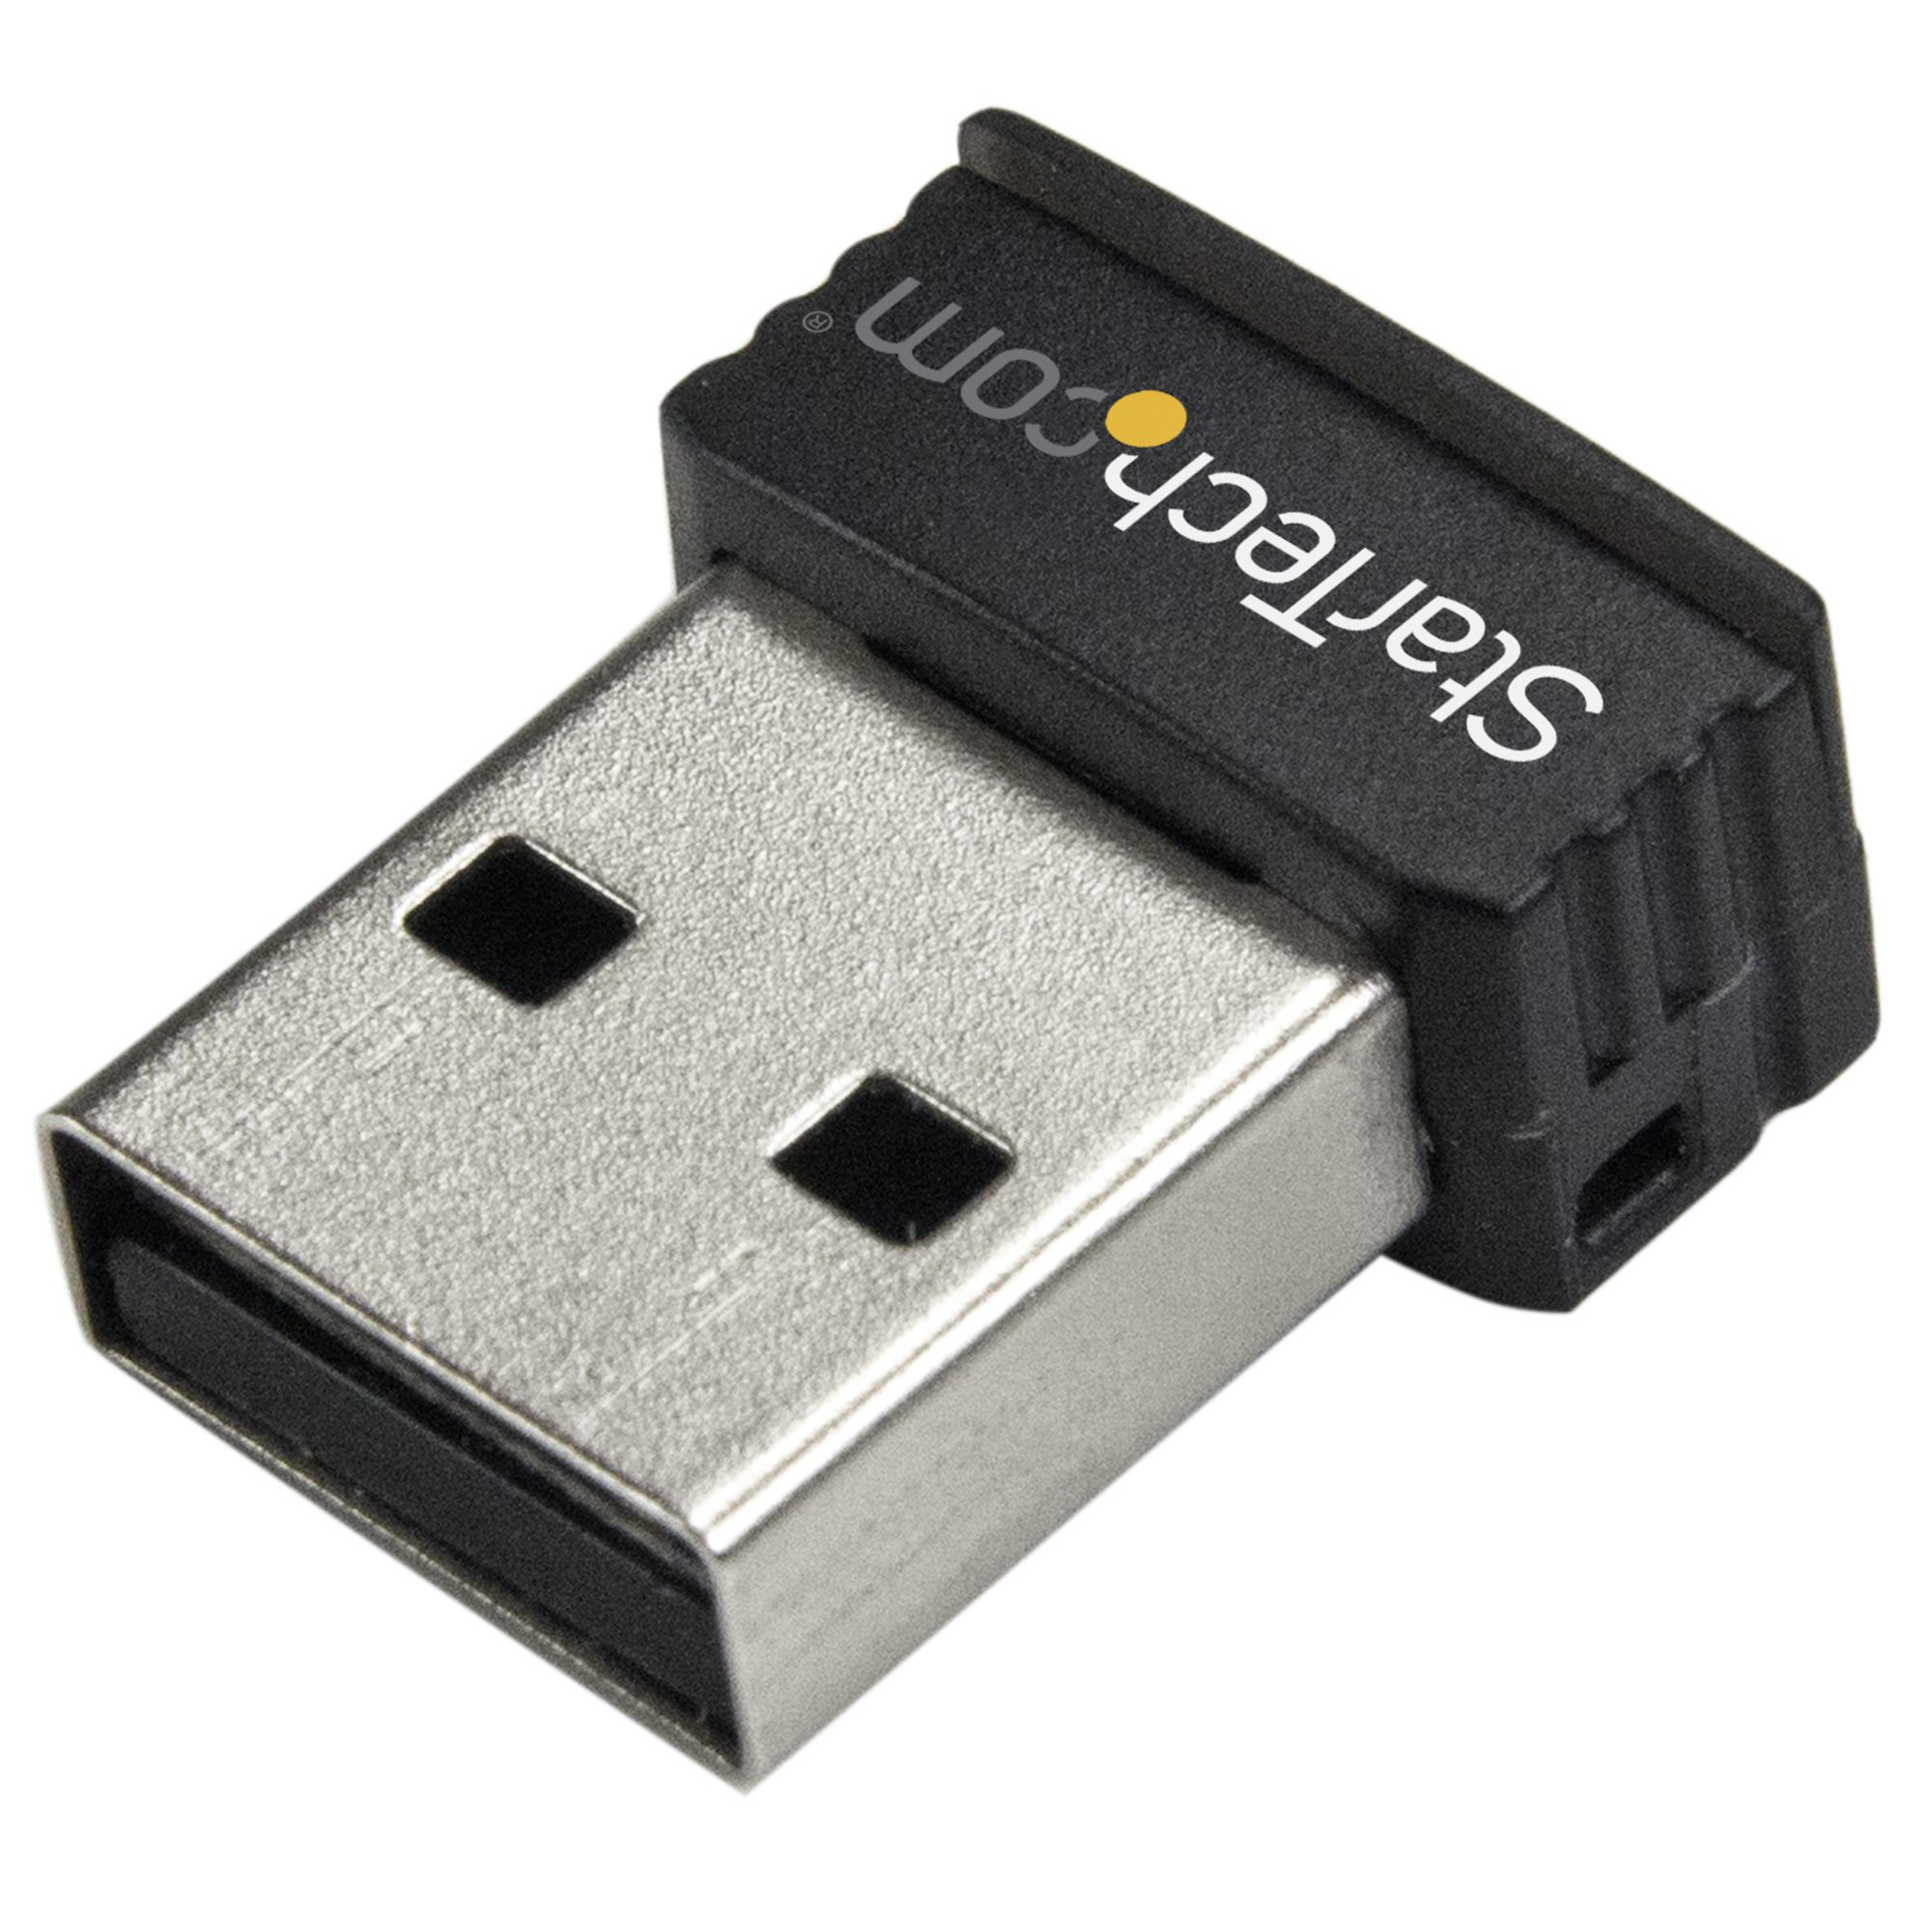 Mini USB 2.0 802.11n 150Mbps Wifi Network Adapter for Windows Linux PC Popular 